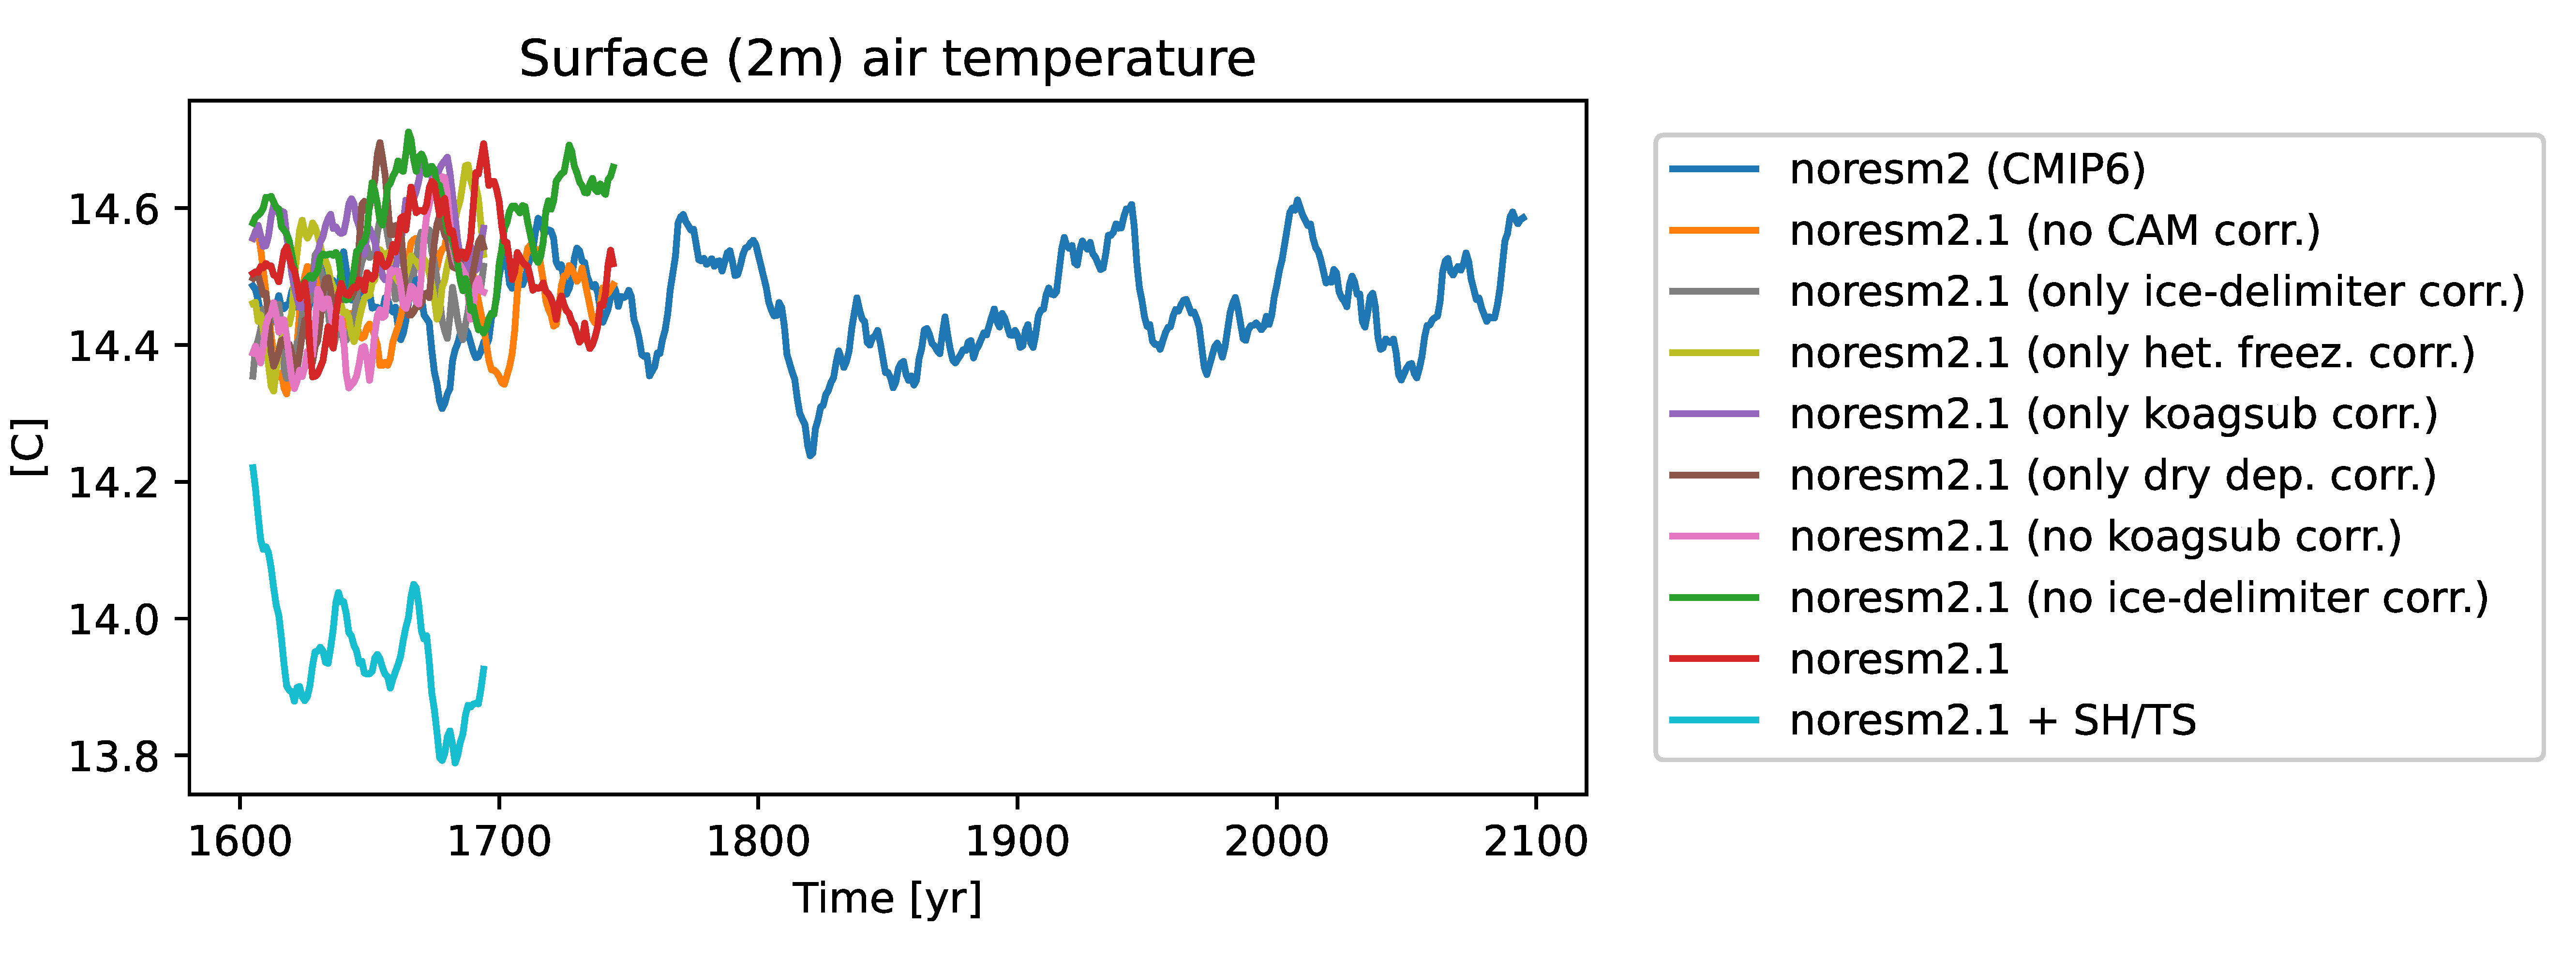 Global annual mean surface (2m) air temperature in fully-coupled simulations.